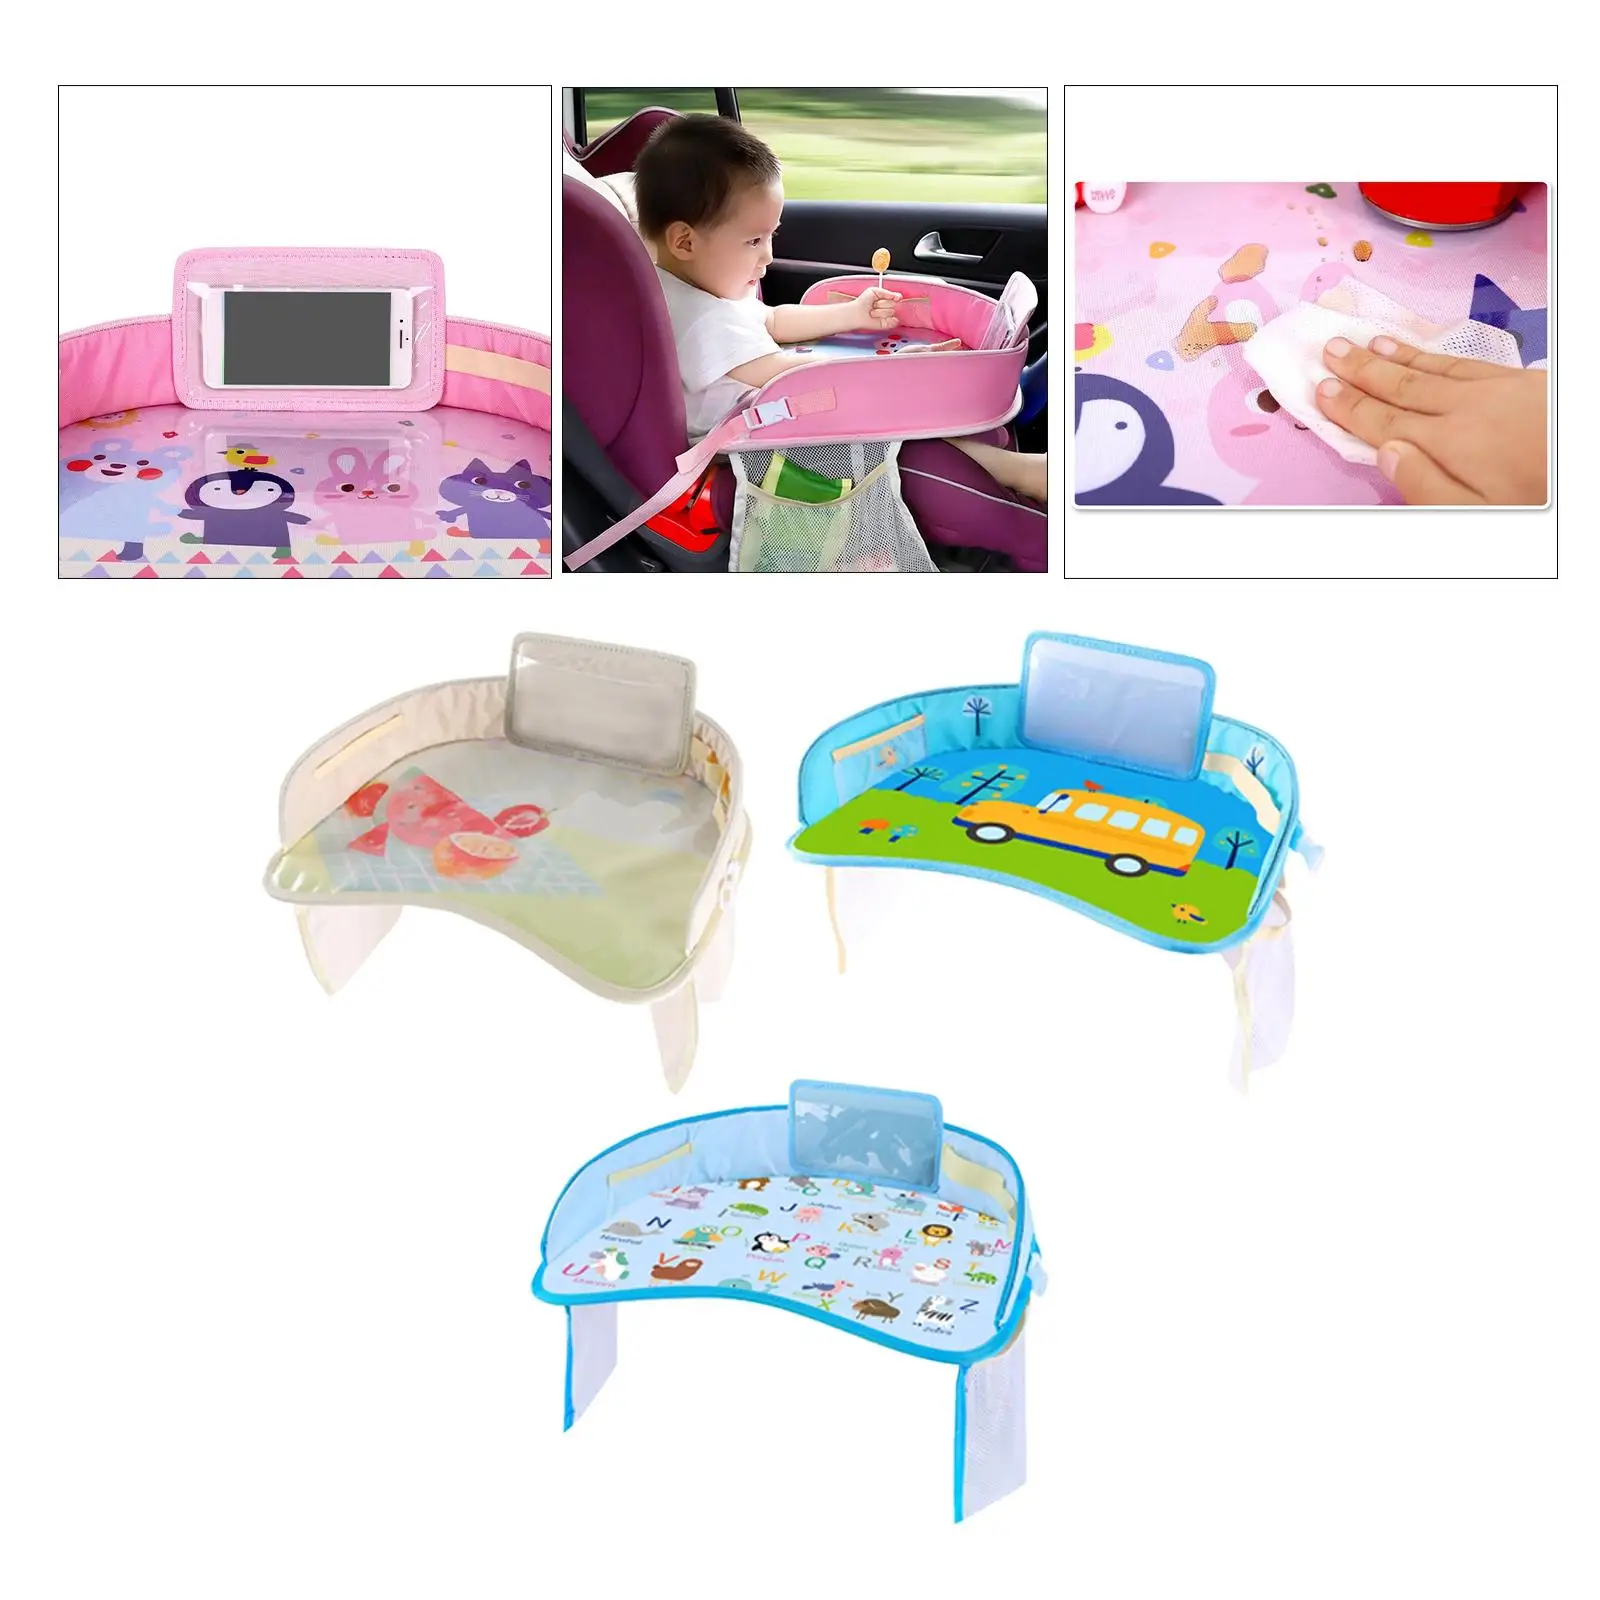 Toddler Lap Desk Organizer Tablet Phone Holder Stand Waterproof Kids Car Tray for Stroller Airplane Travel Carseat Kids